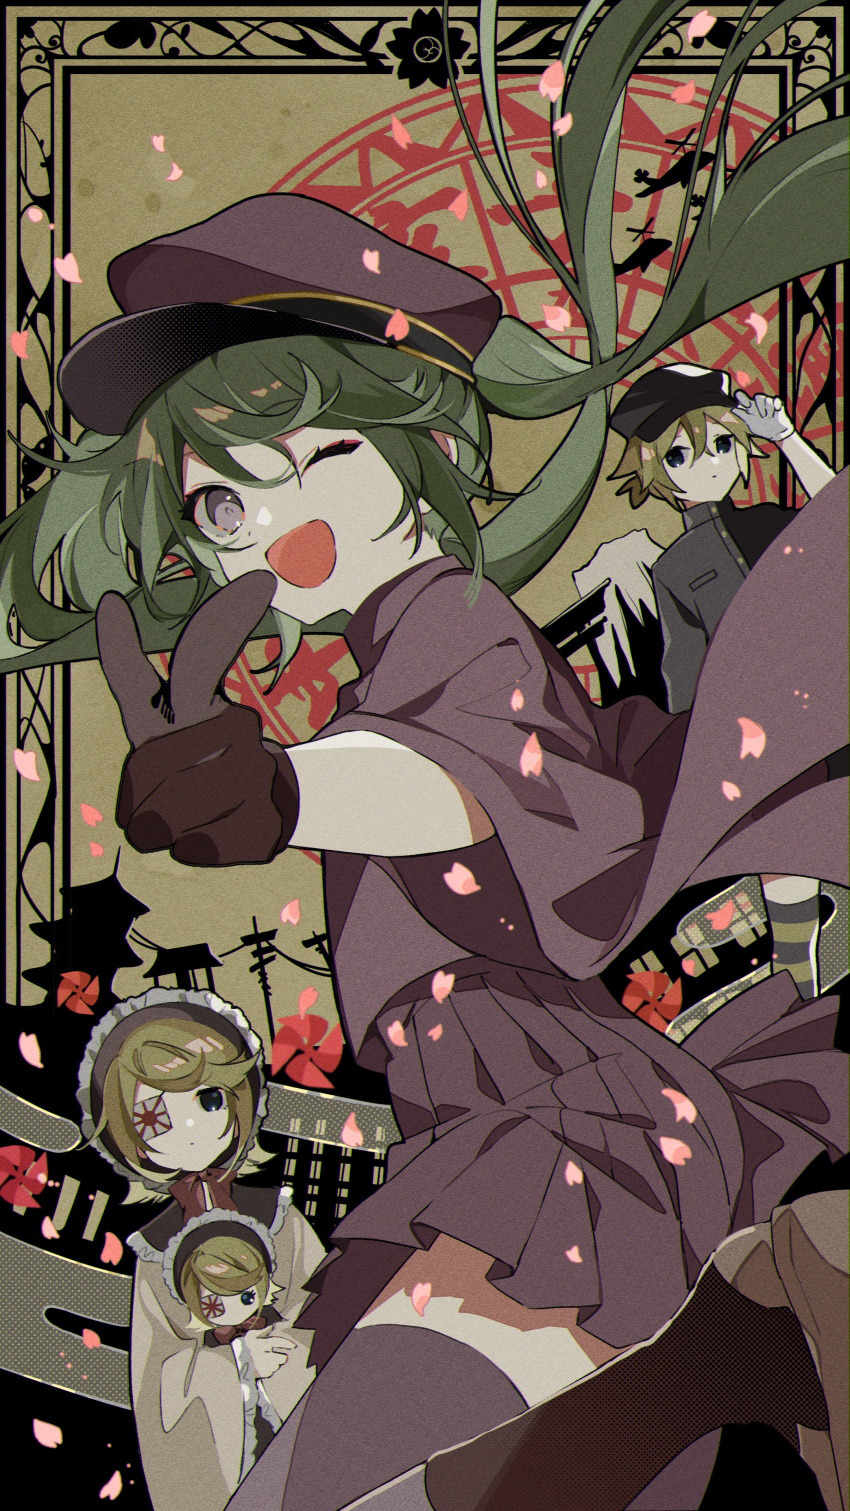 1boy 2girls absurdres bangs black_shirt blonde_hair blue_eyes character_doll cherry_blossoms commentary_request doll doll_hug dutch_angle eyebrows_visible_through_hair eyepatch film_grain frilled_hat frills from_side gloves green_hair hair_between_eyes hand_on_headwear hat hatsune_miku highres holding holding_doll kagamine_len kagamine_rin leg_up long_hair military military_hat military_uniform multiple_girls omutatsu one_eye_closed one_eye_covered open_mouth pinwheel pleated_skirt pointing pointing_at_viewer purple_eyes purple_gloves purple_headwear purple_legwear purple_shirt purple_skirt red_neckwear senbon-zakura_(vocaloid) shadow shiny shiny_hair shirt short_hair skirt striped striped_legwear swept_bangs thighhighs uniform vocaloid wide_sleeves zettai_ryouiki